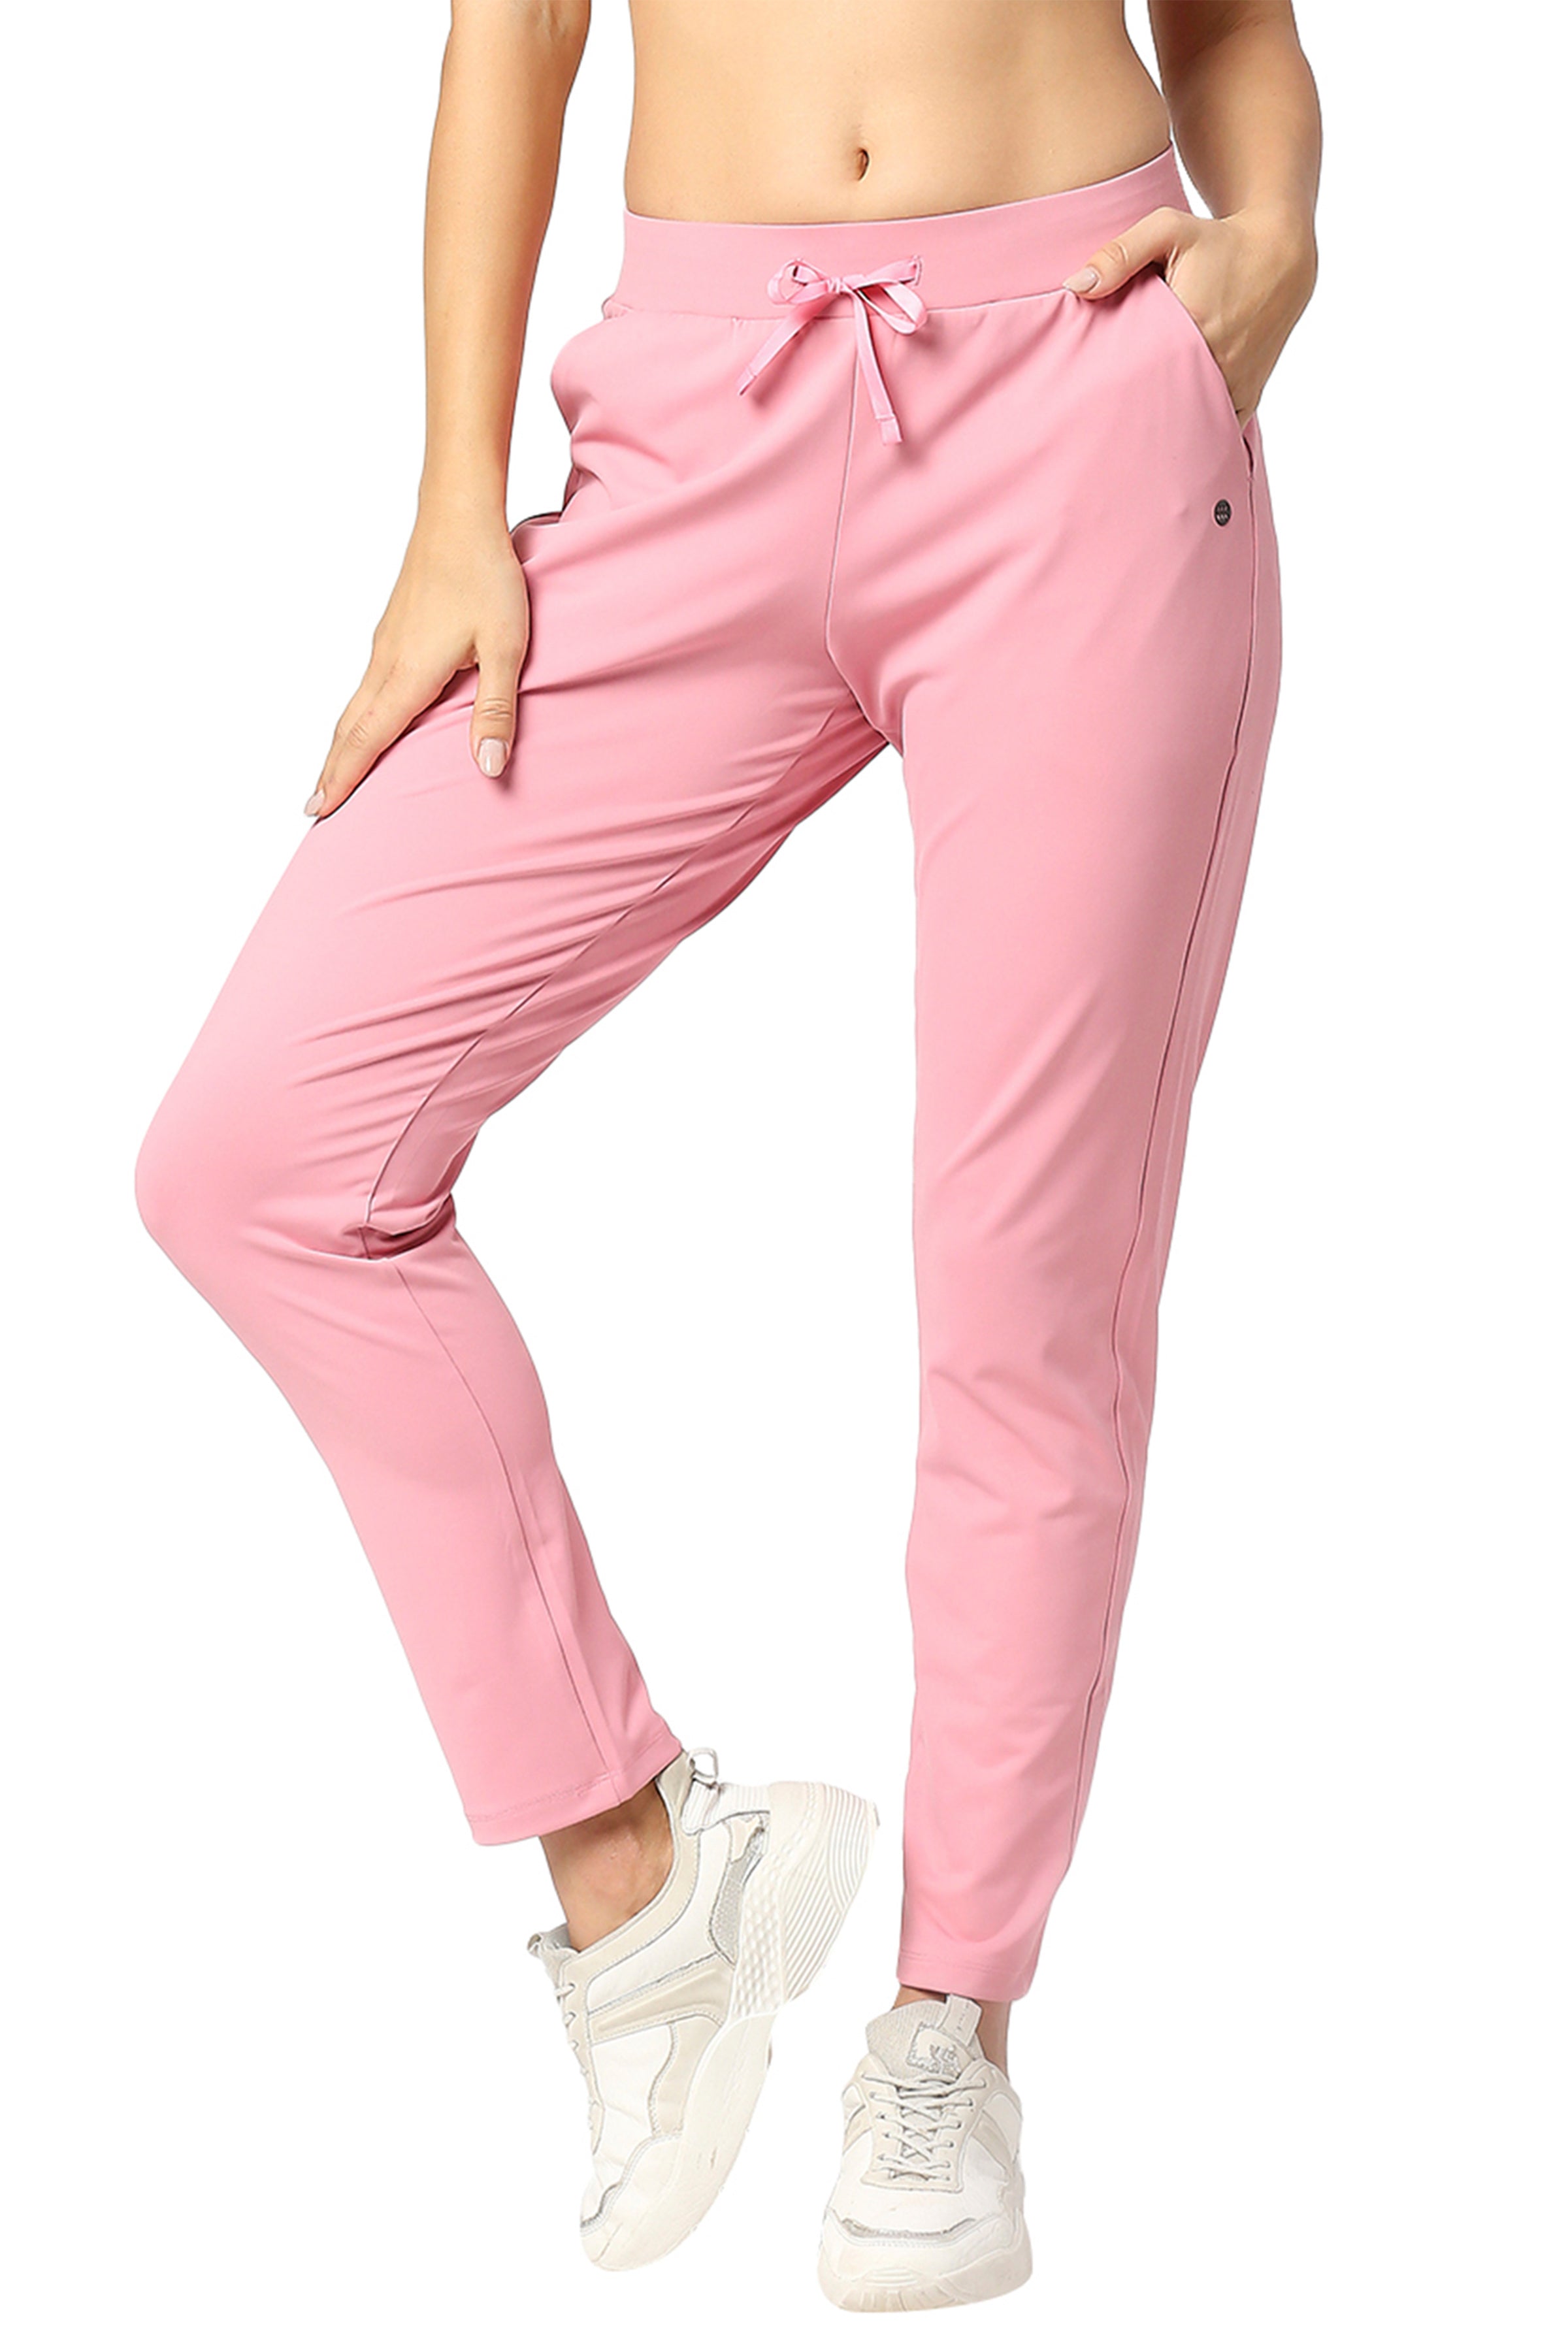 Buy Women's Slim Fit Casual Track Pants/Comfortable Lower/Trouser/Sports/ Joggers/Pyjama/Nightwear and Daily Use Gym Wear Online at Best Prices in  India - JioMart.